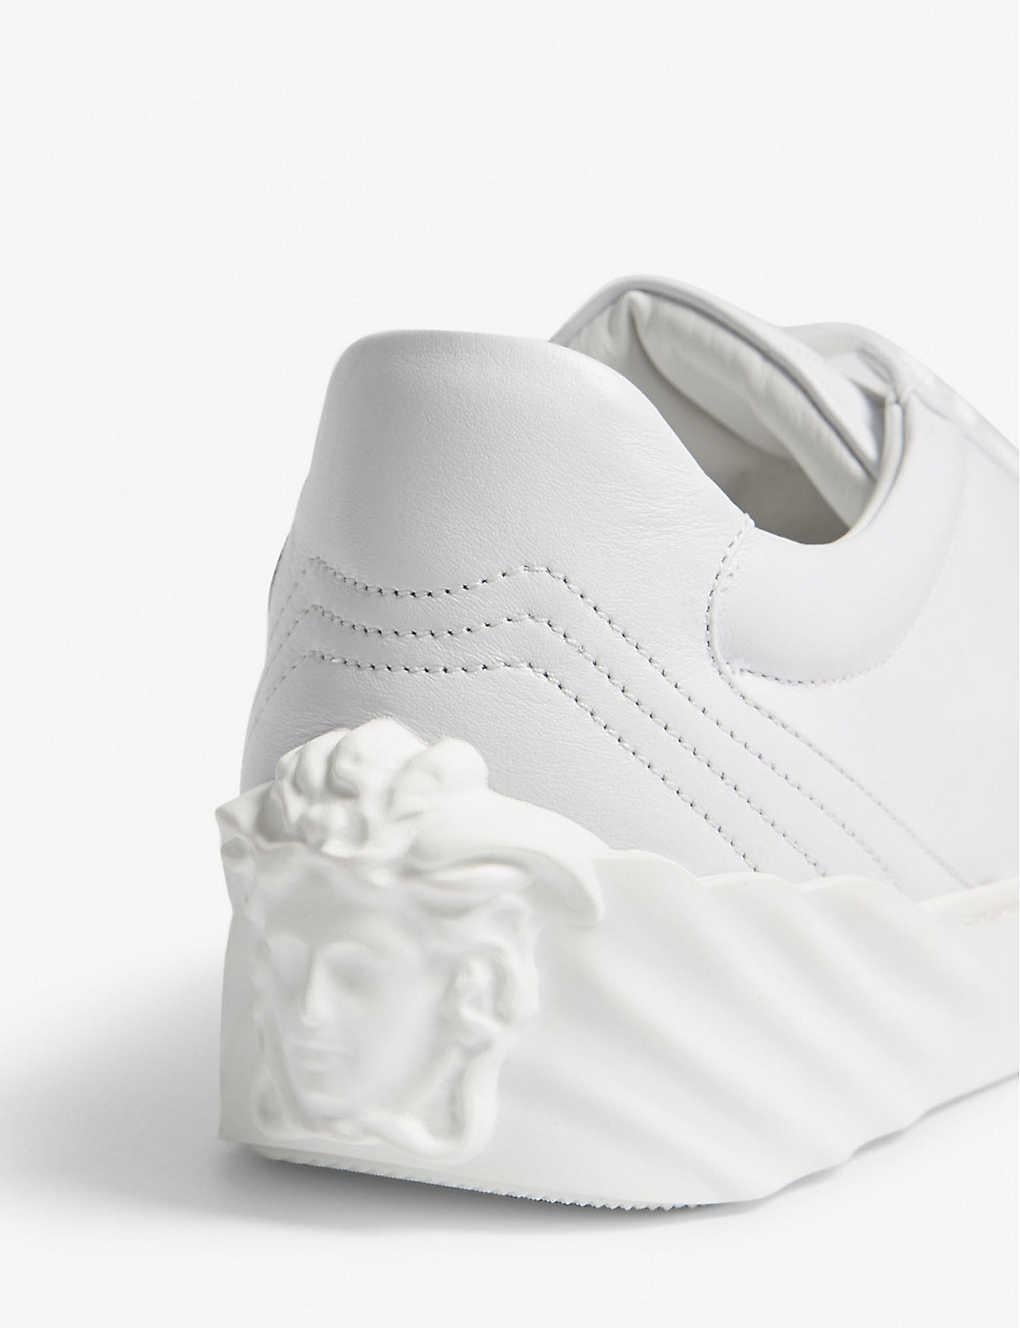 Gray New VERSACE MEDUSA HEA WHITE LEATHER SNEAKERS 41- 8